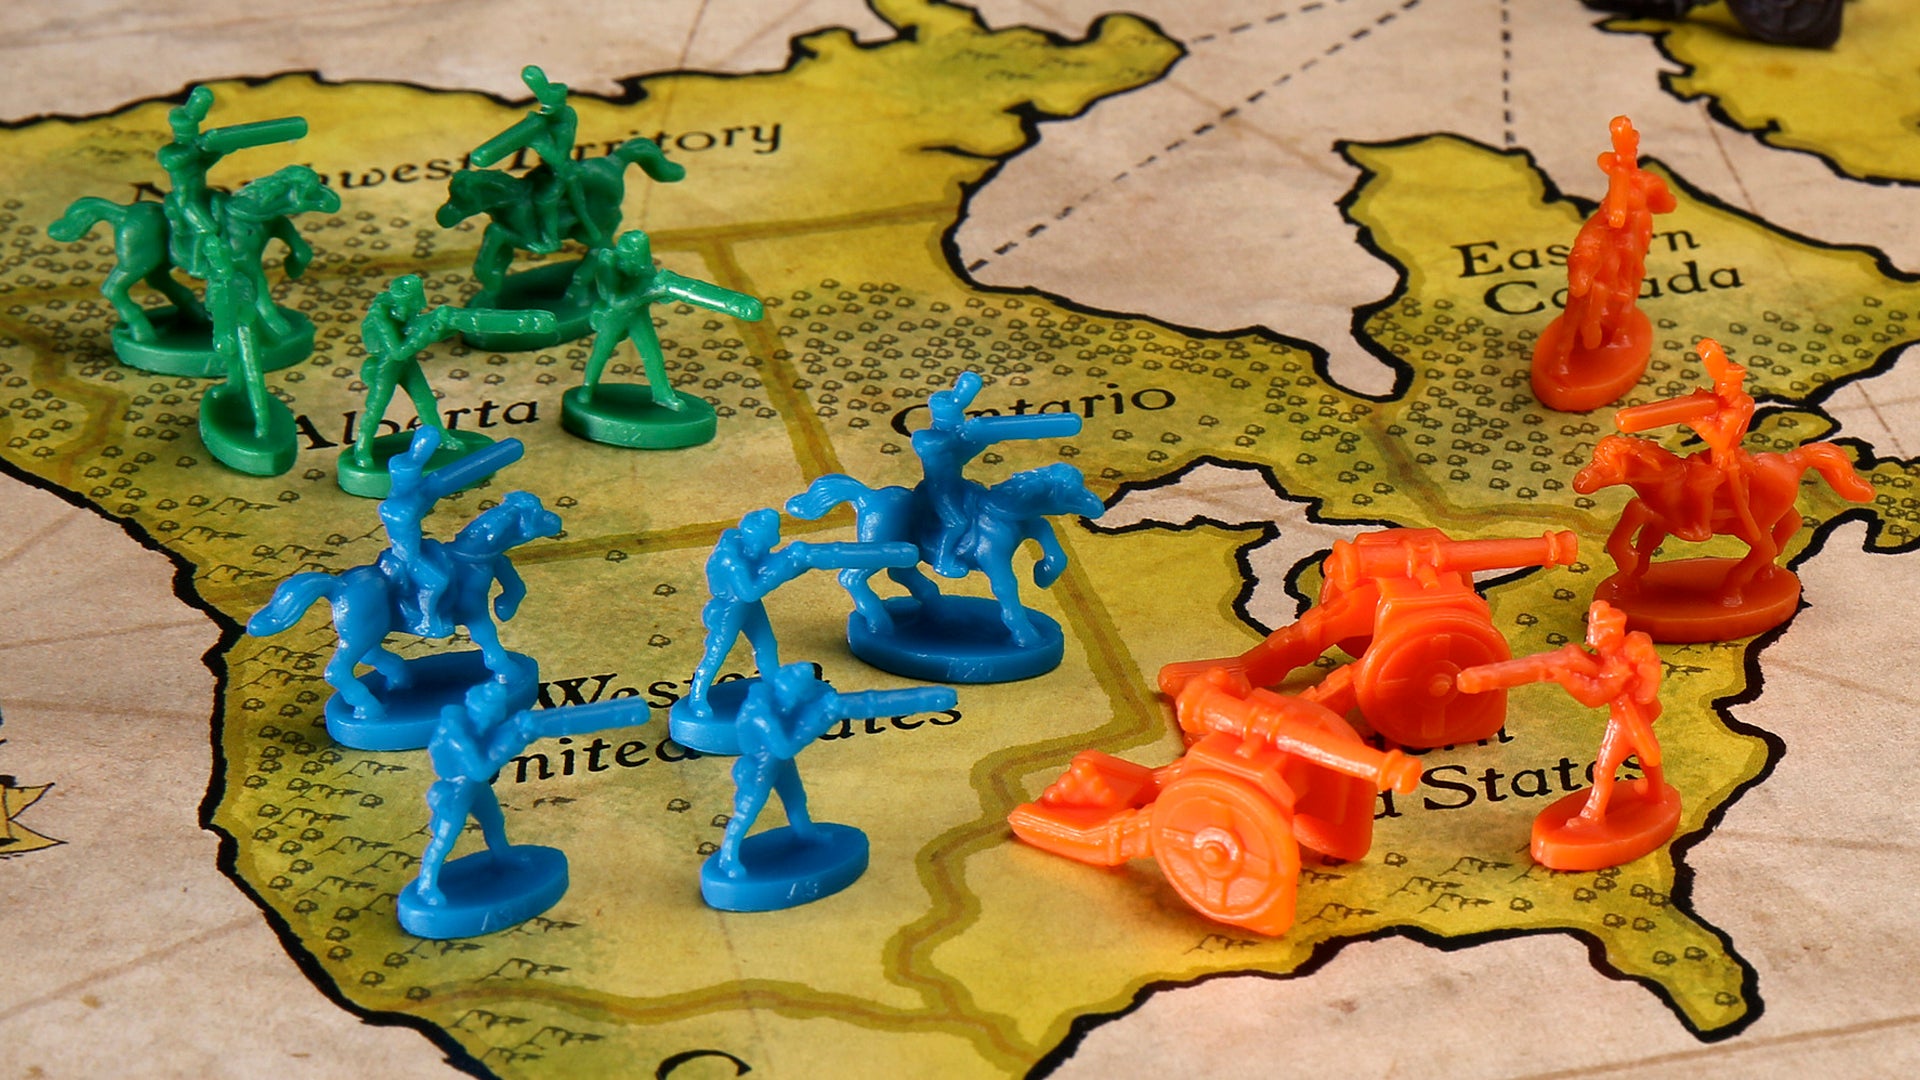 Wegenbouwproces Beoefend Suradam Risk is the next board game classic to be turned into a TV series |  Dicebreaker